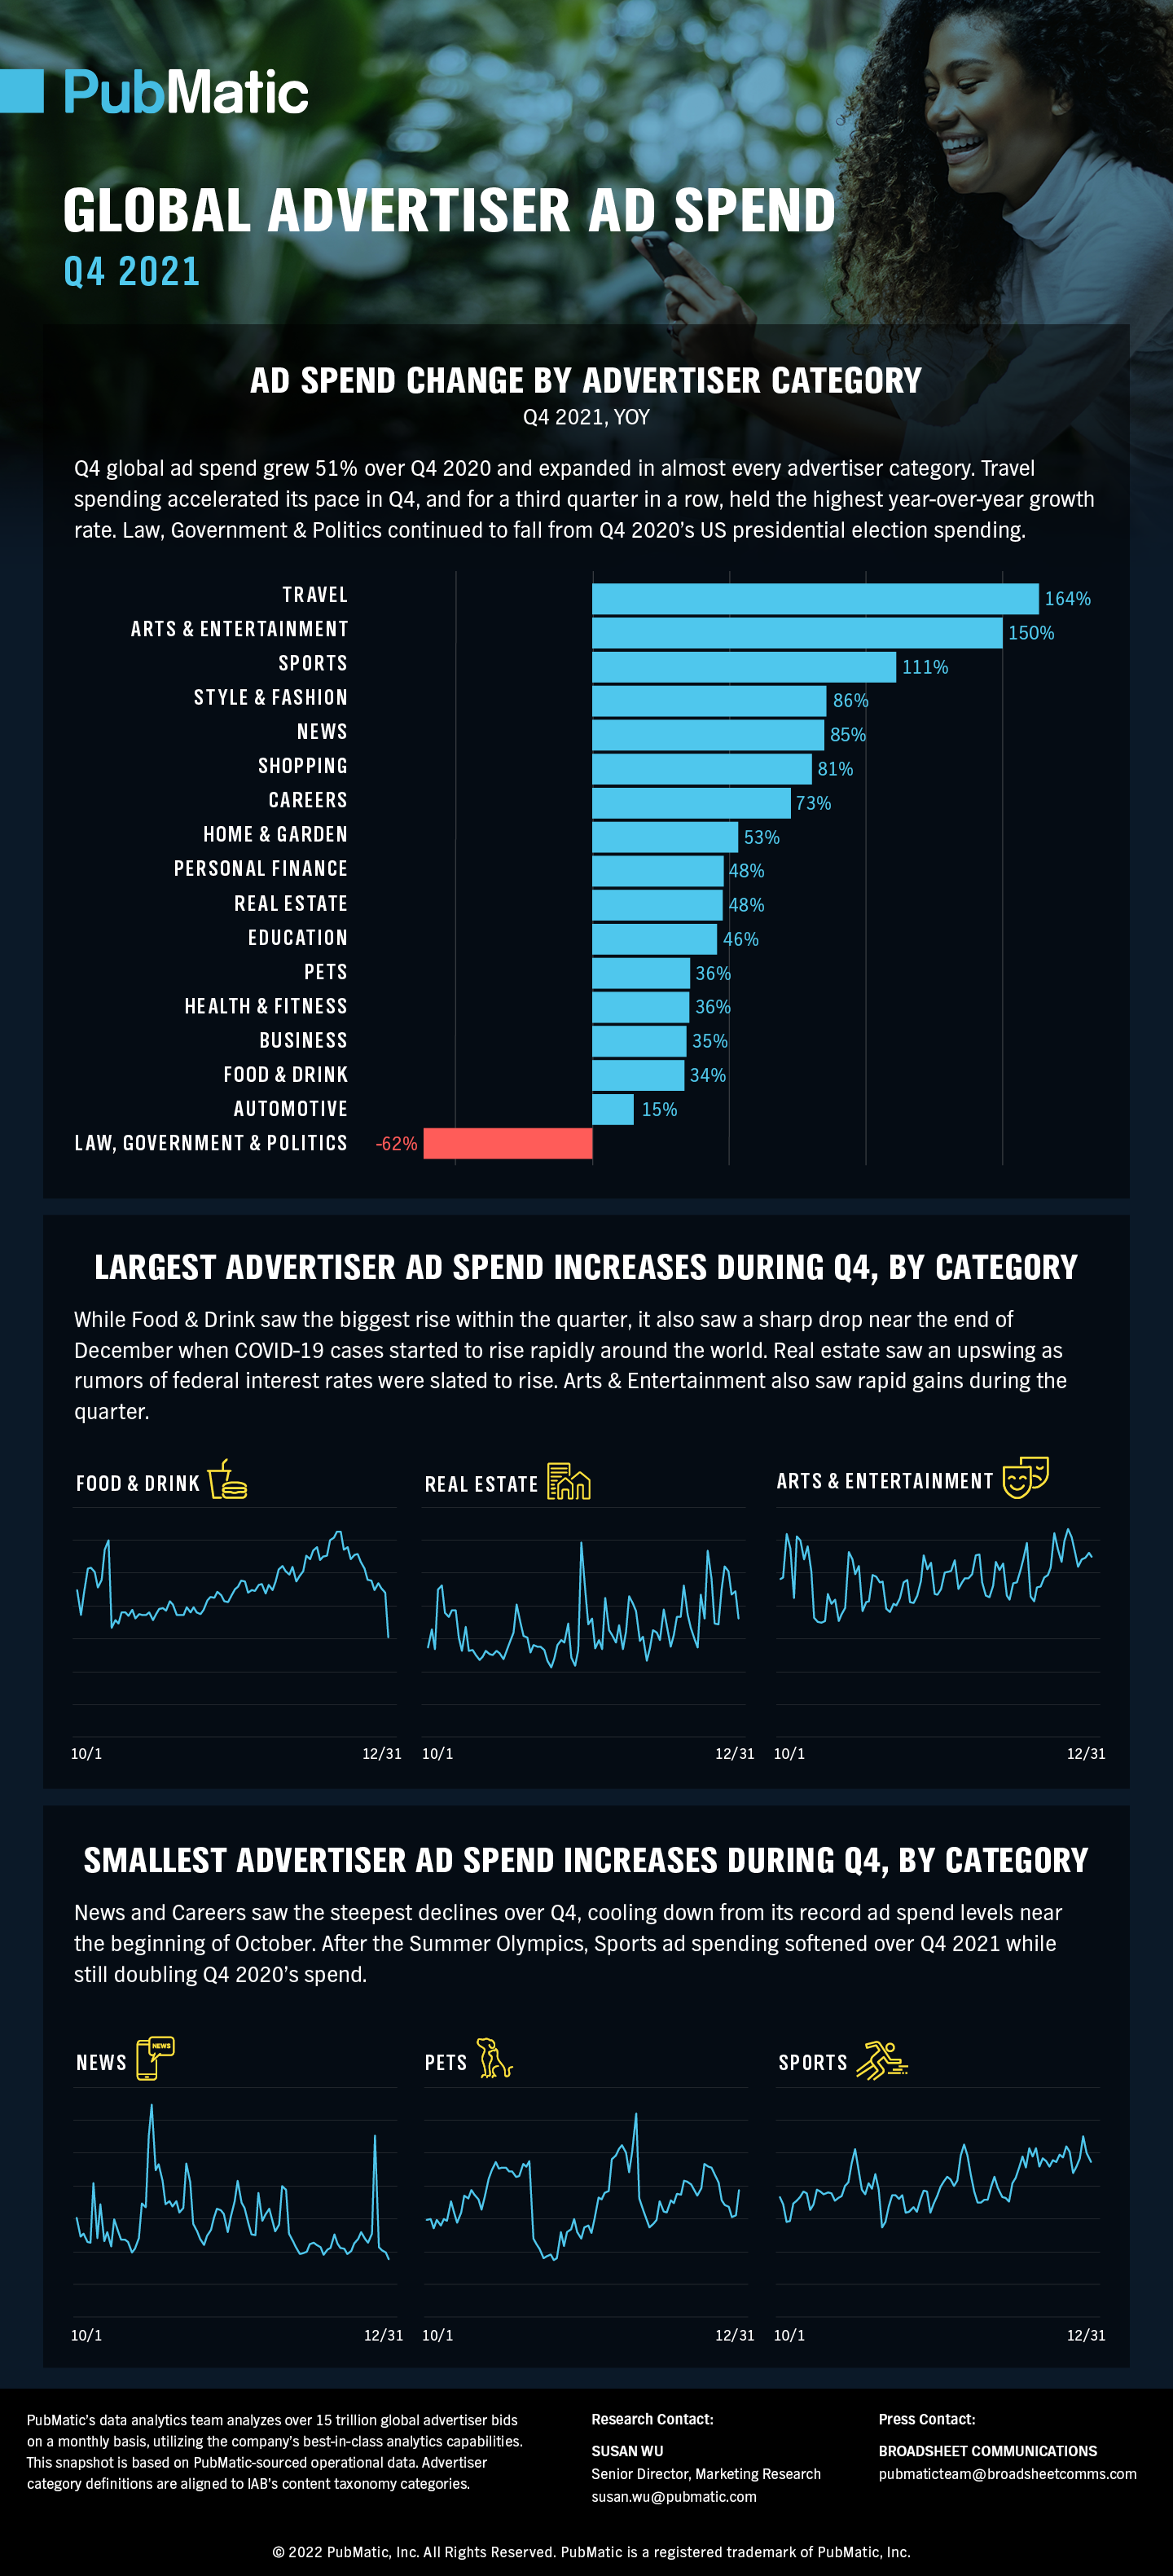 Scaled down preview of the Q4 2021 Global Advertiser Ad Spend infographic